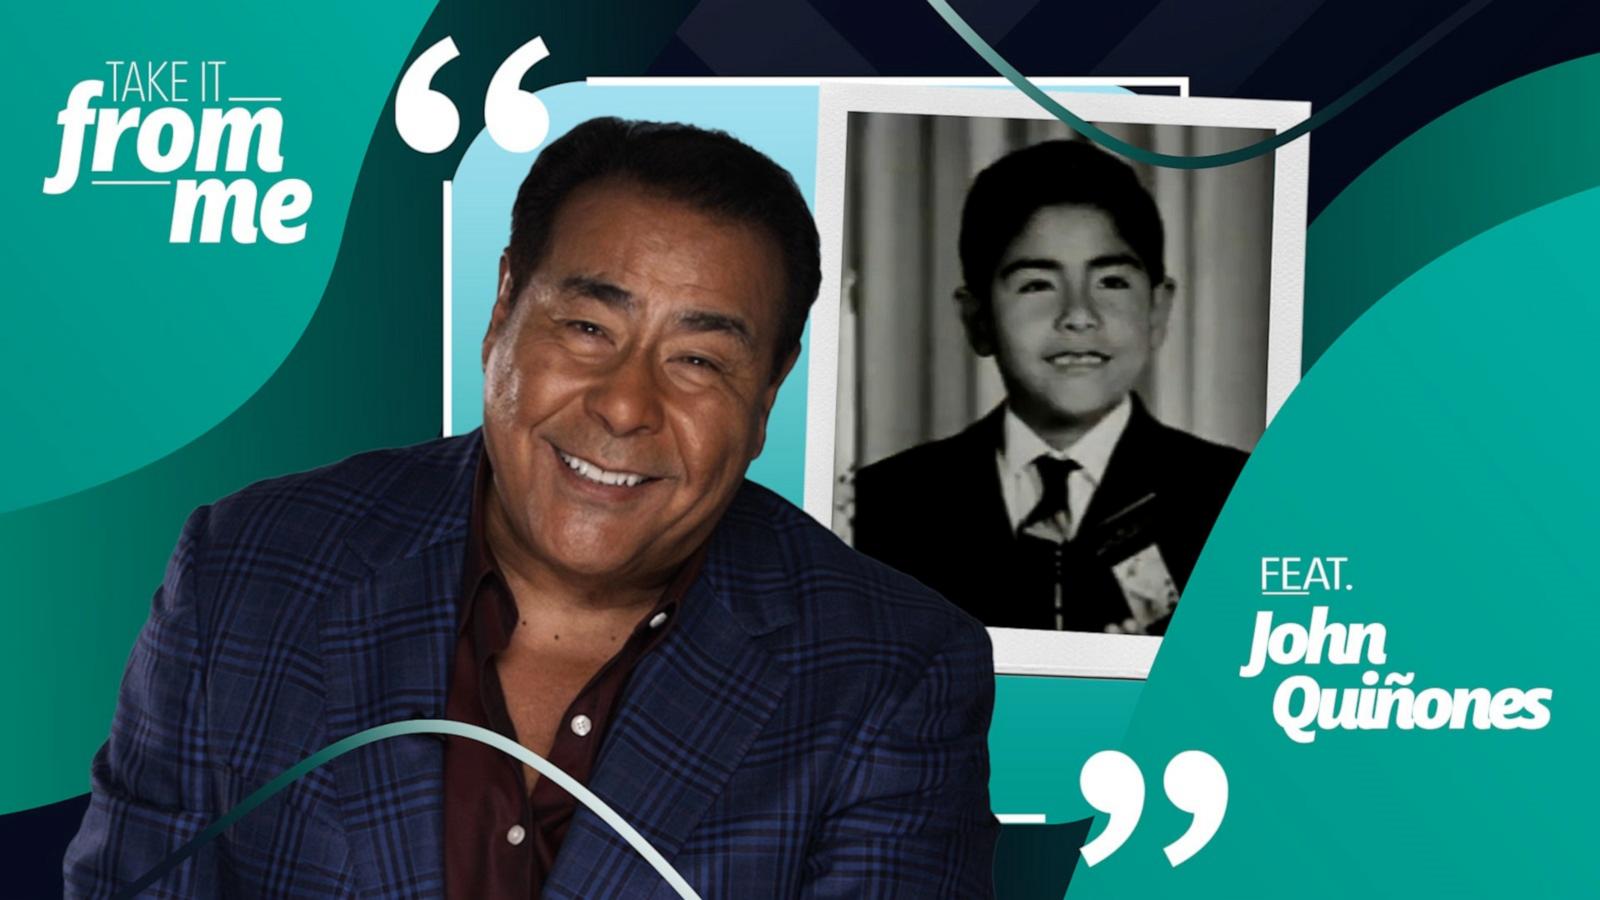 VIDEO: John Quiñones says true character is what you do when nobody is looking